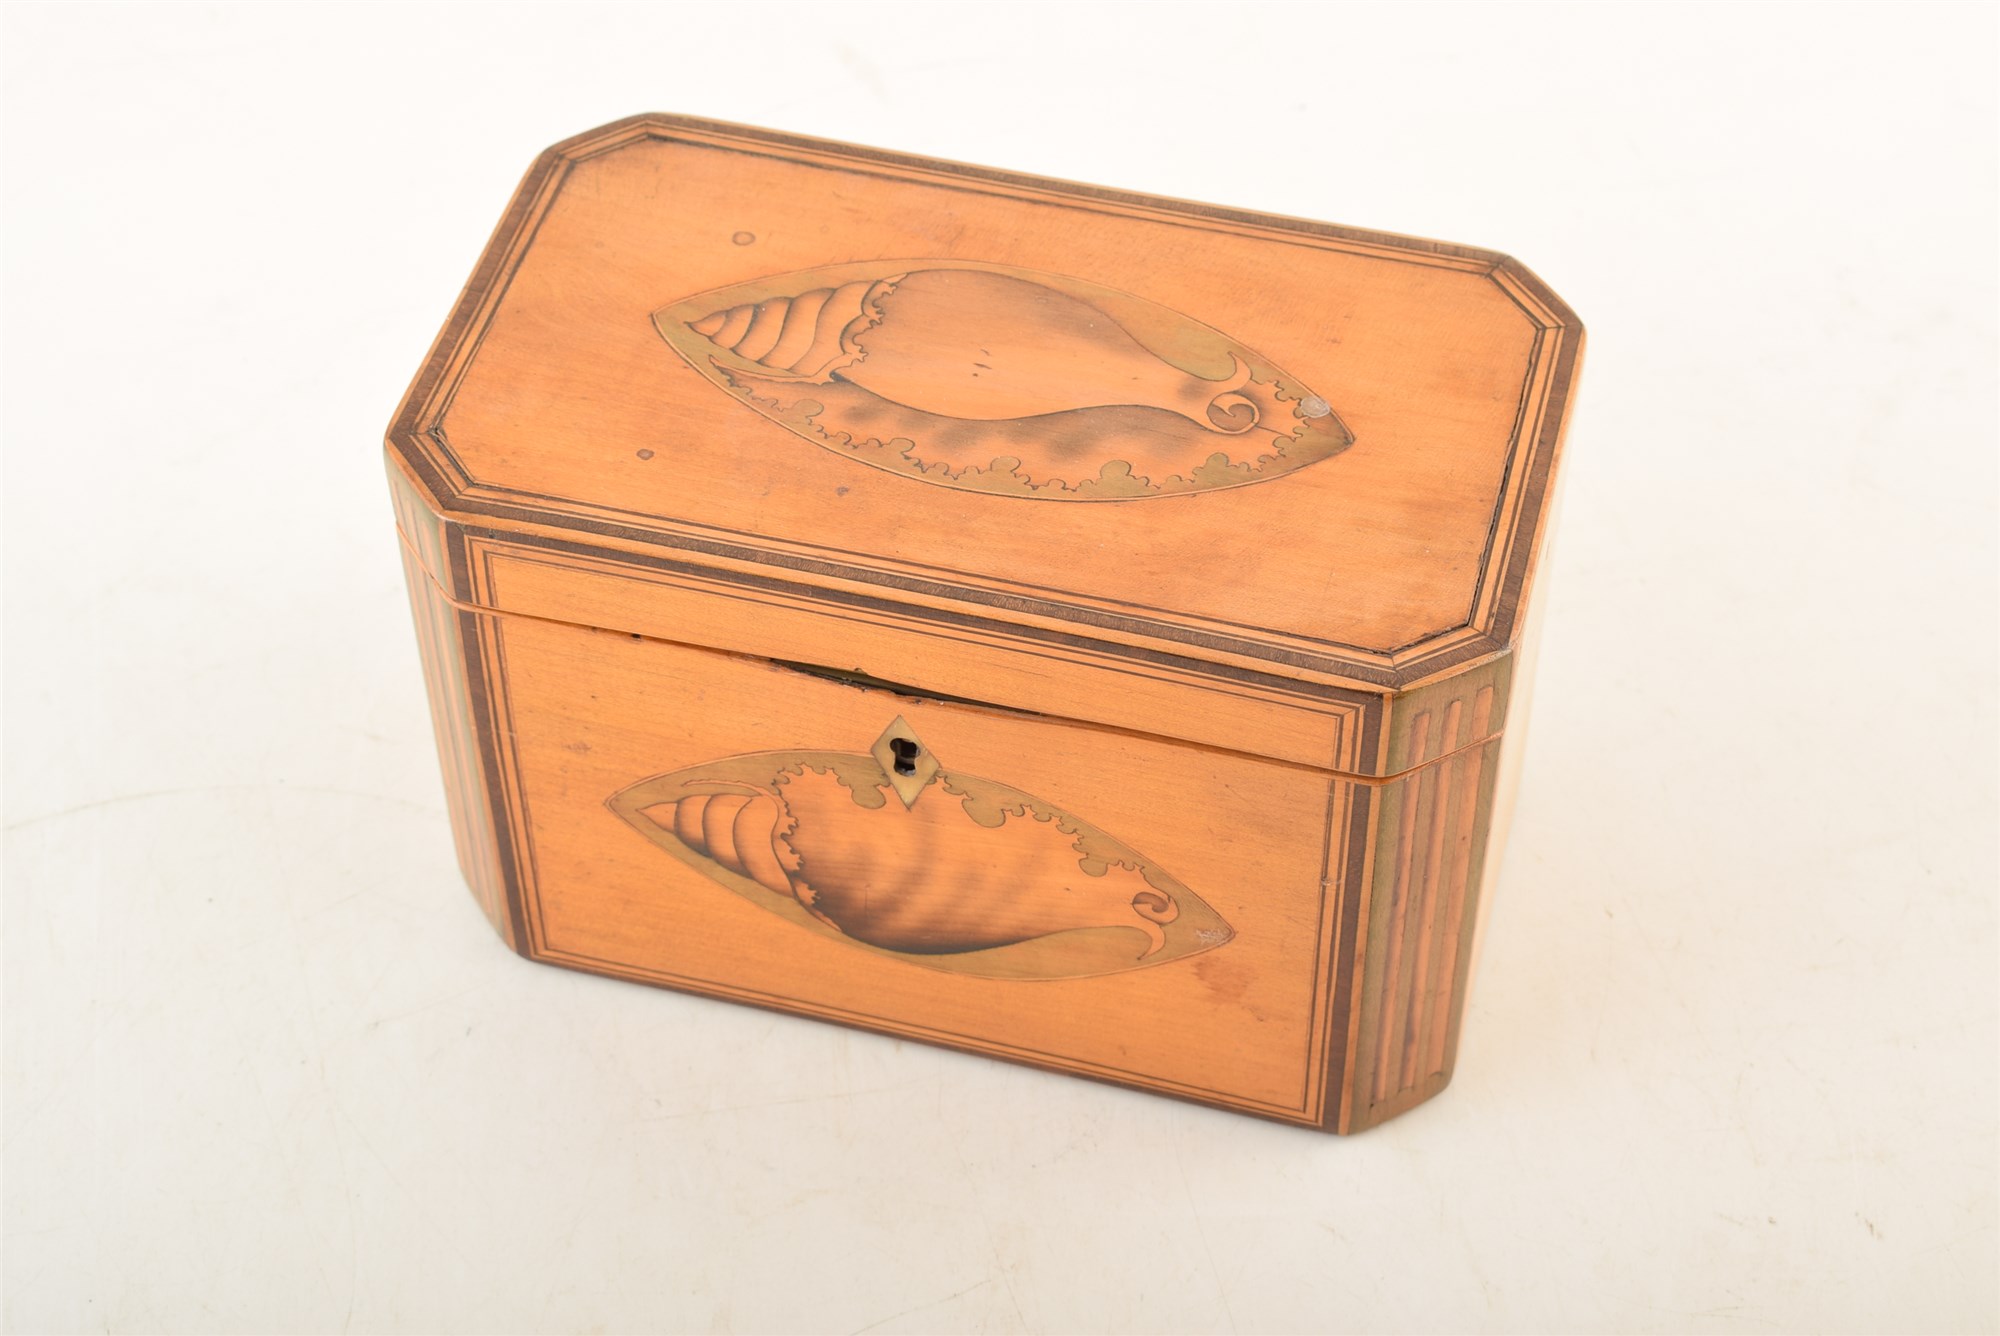 An early 19th century satinwood tea caddy, with inlaid shell motif, ivory escutcheon and mahogany